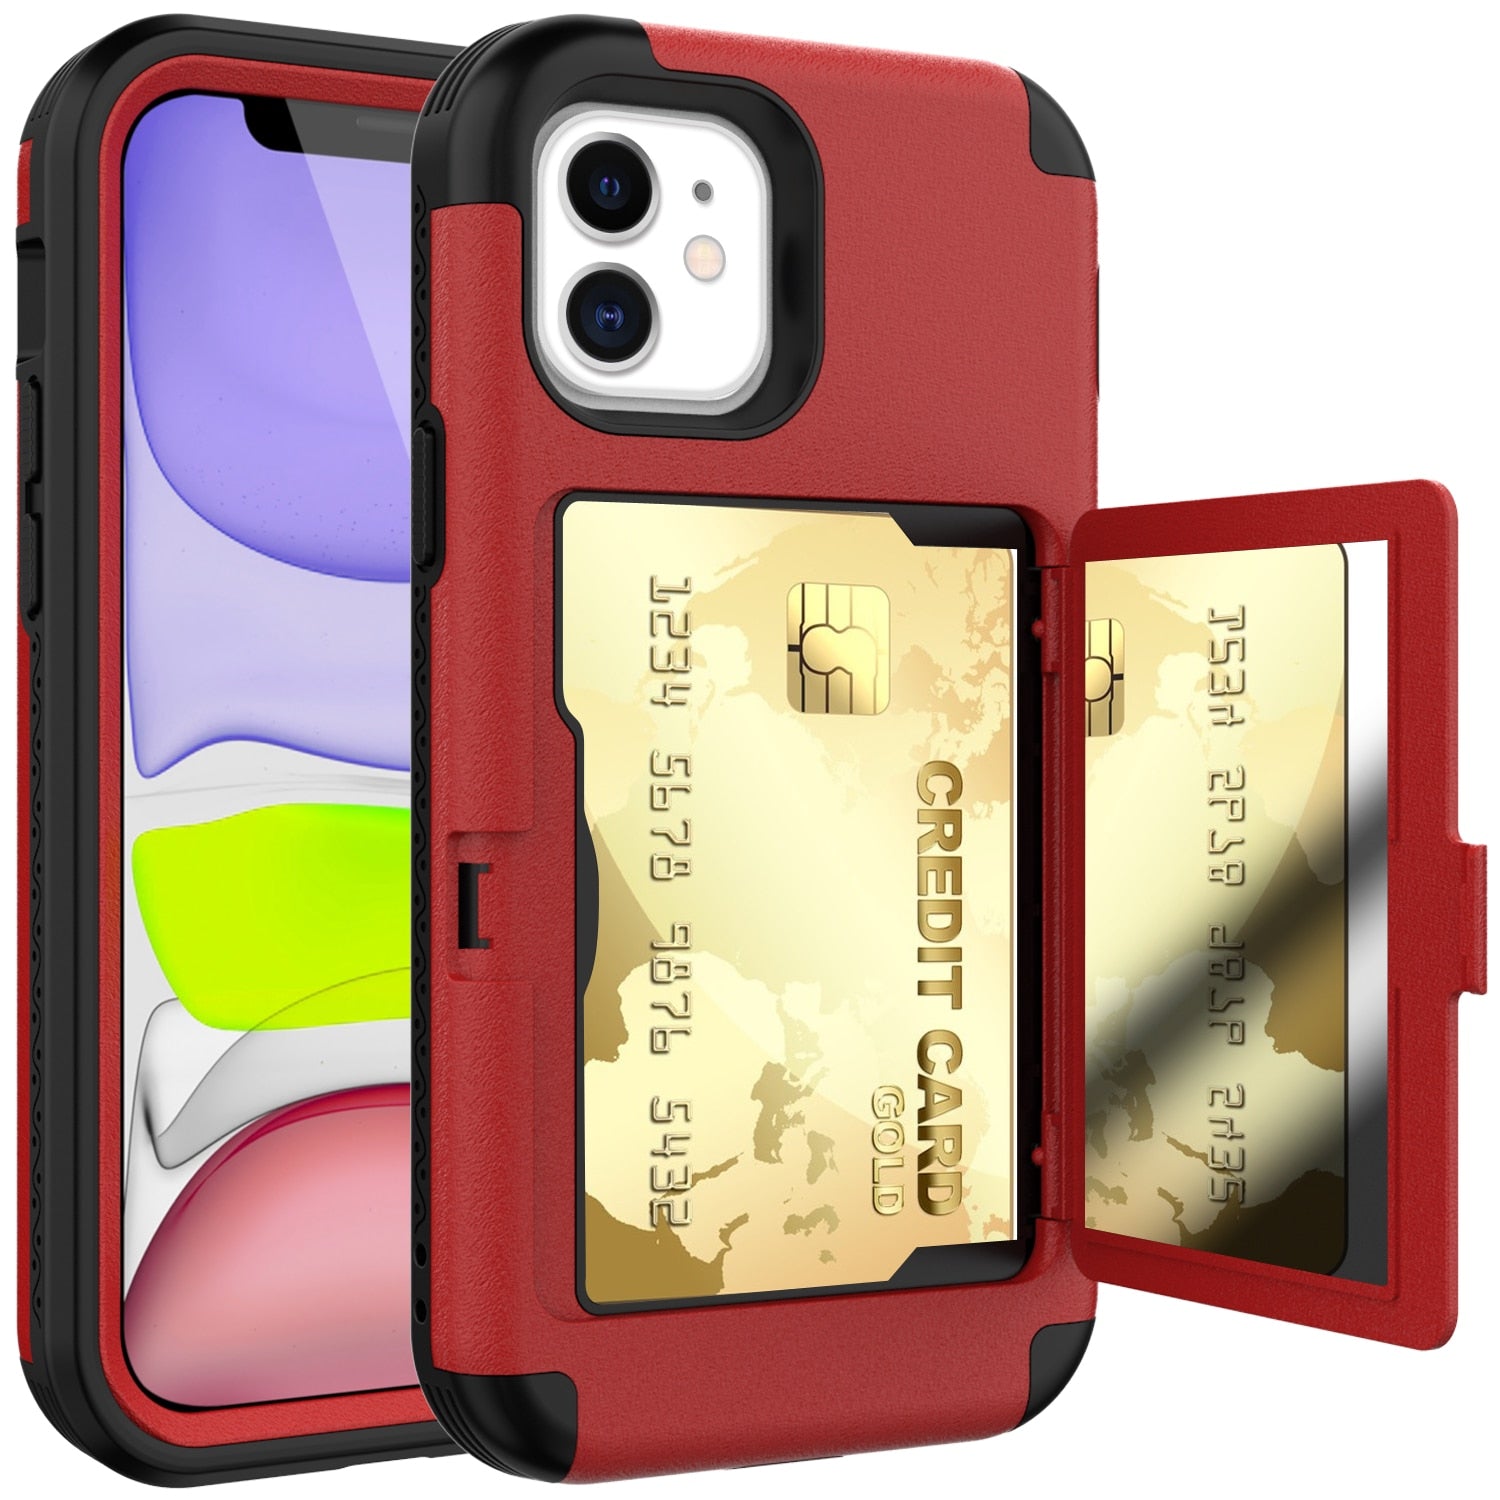 For iPhone 12 mini Pro Max Case With Wallet Card Hidden Credit Card Cover For iPhone 12 Pro Max with mirror Case for iPhone 12 - 380230 For iPhone 12 Mini / Red / United States Find Epic Store